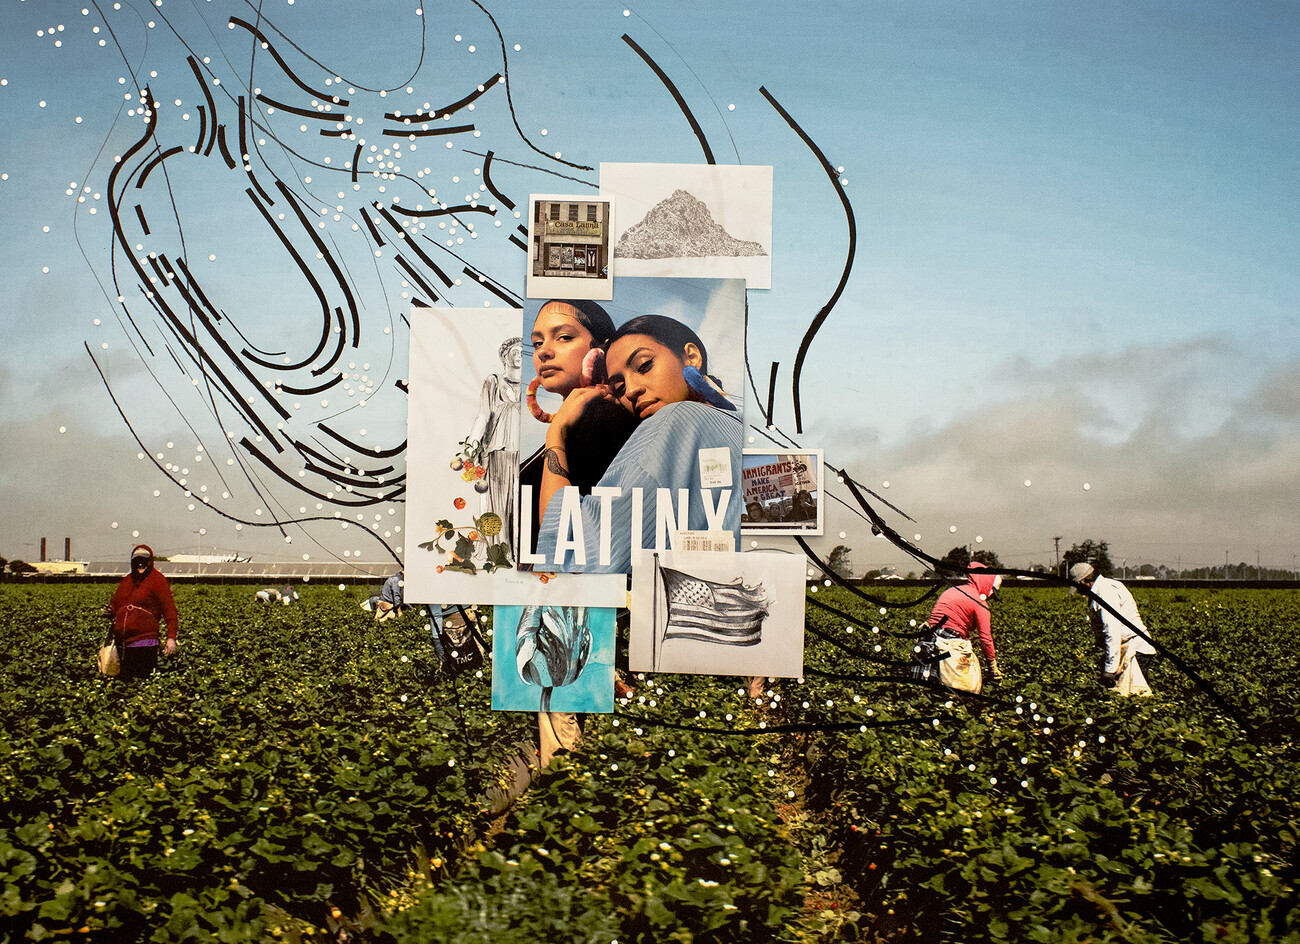 photograph of migrant workers in a field with images collaged on top